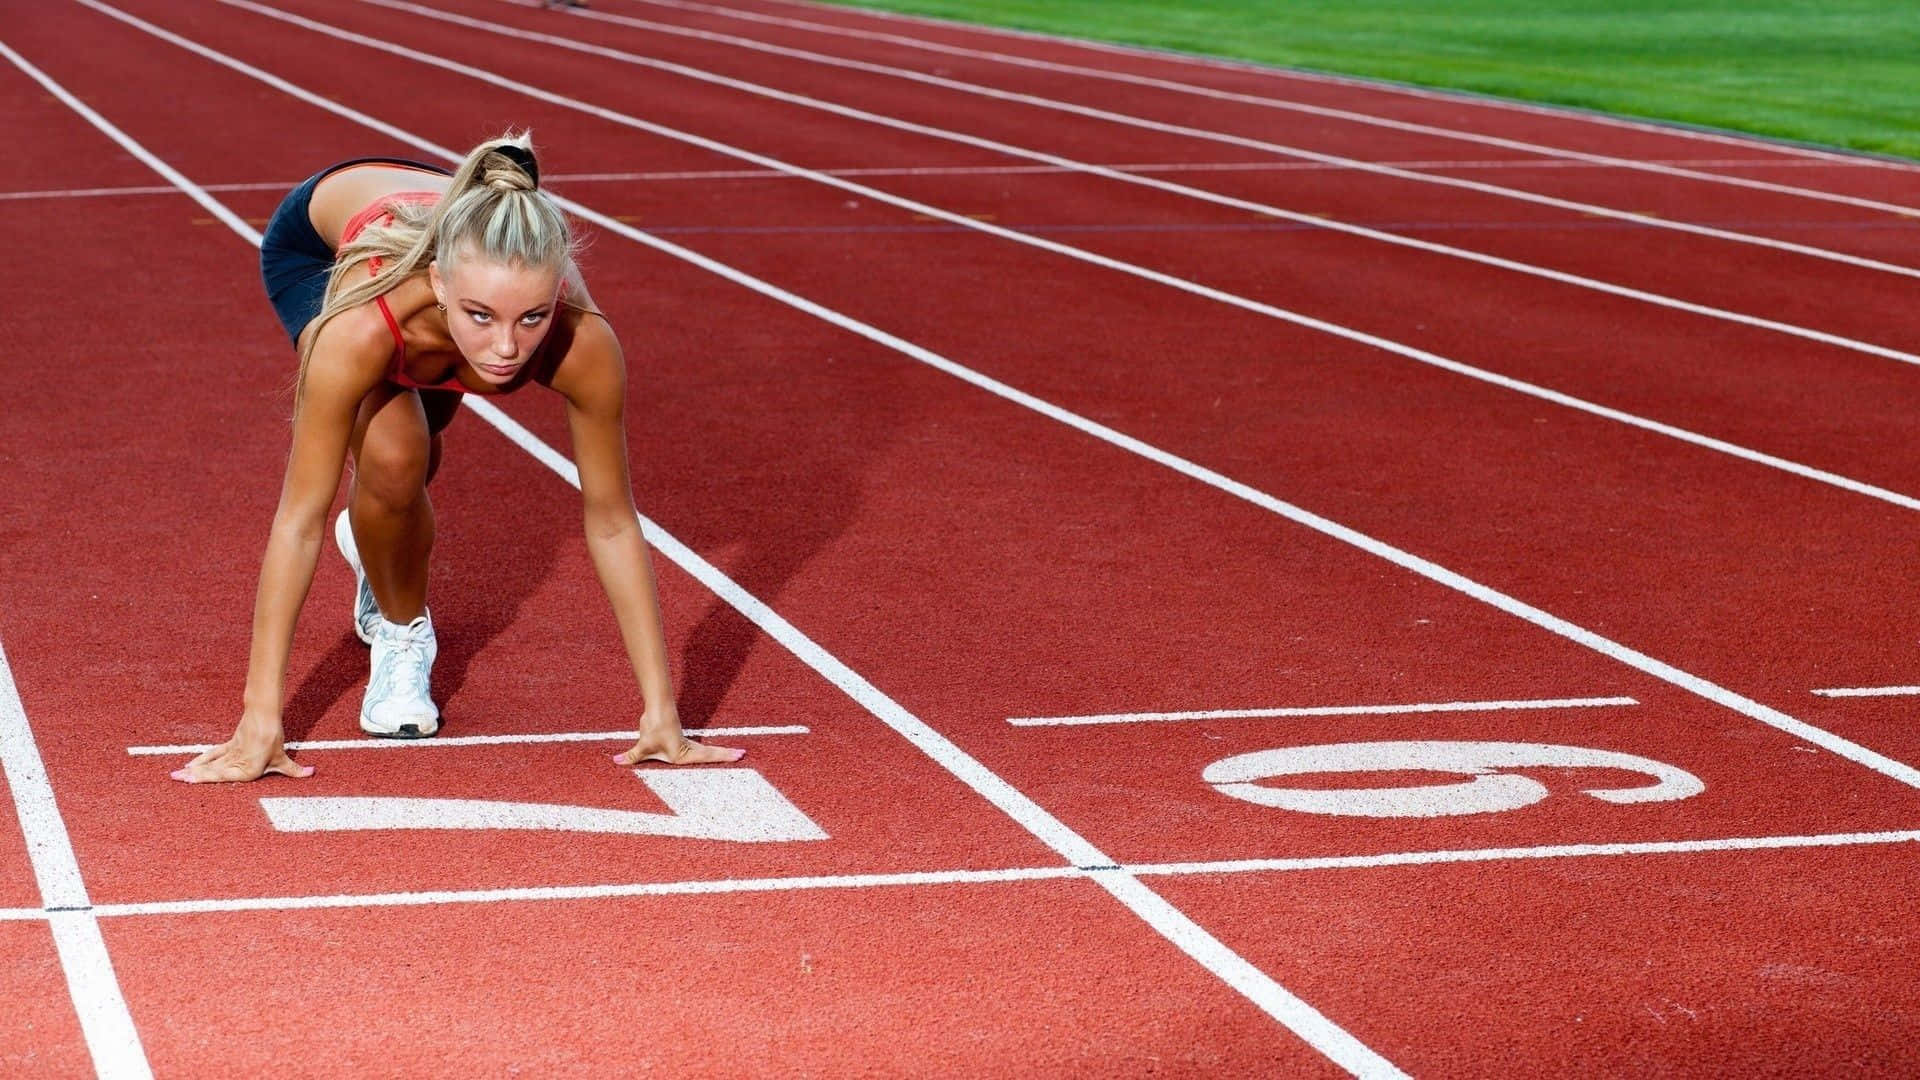 A Woman Is Preparing To Run On A Track